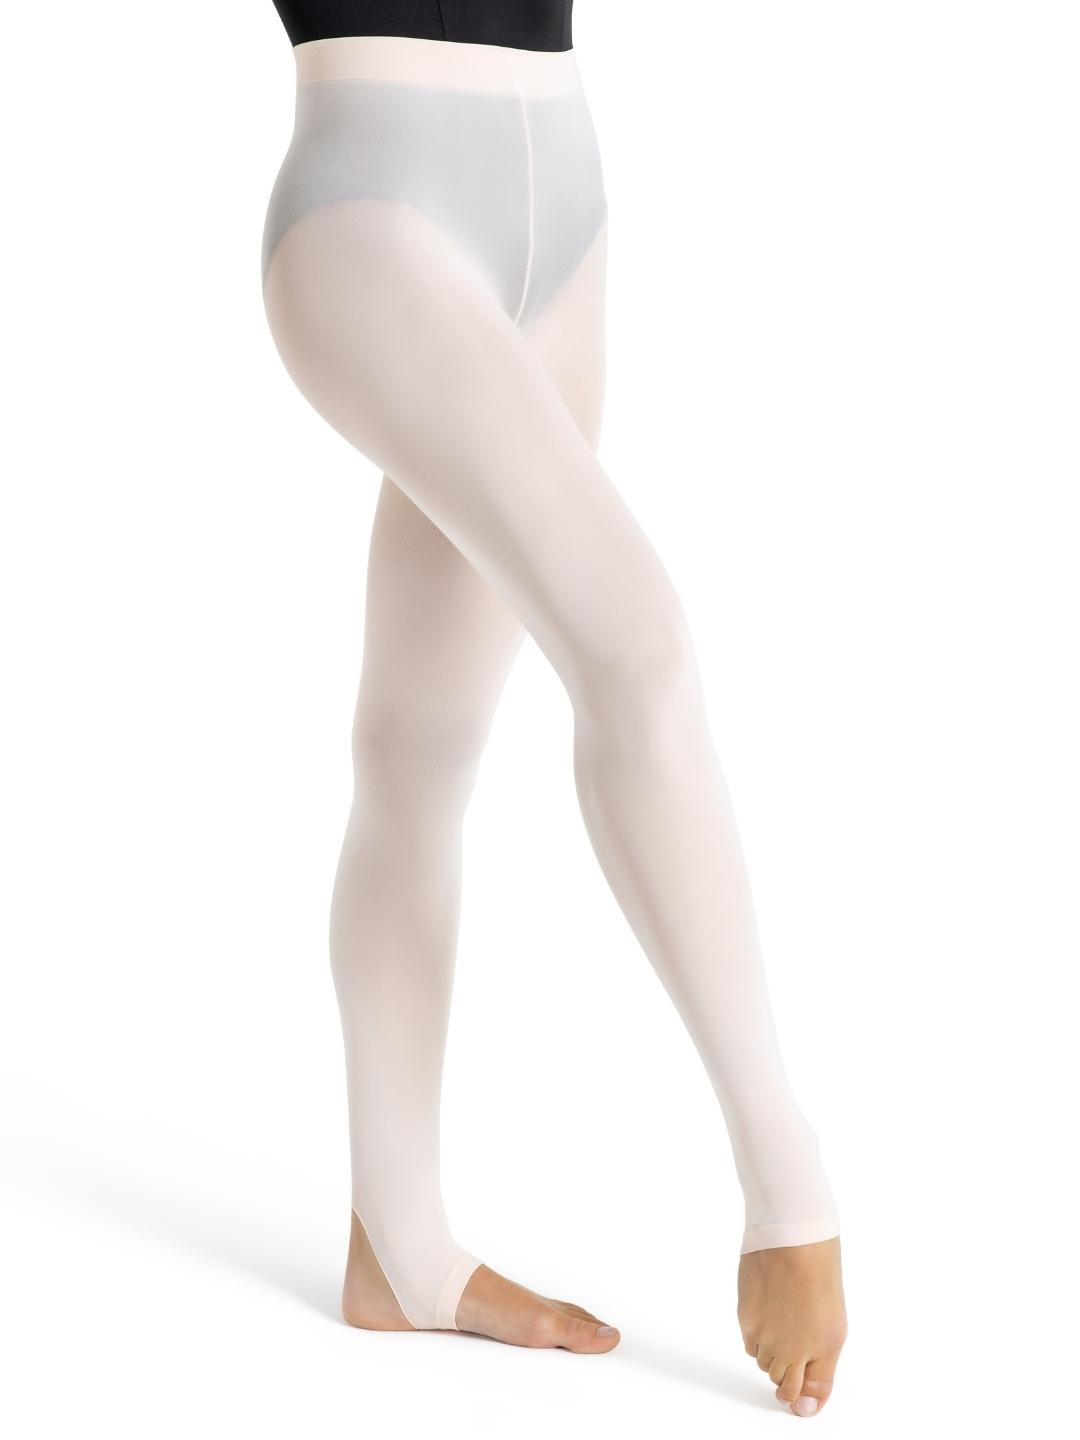 Capezio Ultra Shimmery Stirrup Tights For Women, Lustrous Dance Tights For  Performance, Practice & Daily Wear, Women's Tights With Nylon & Spandex For  Stretch & Support - Toast, M (Medium) : 